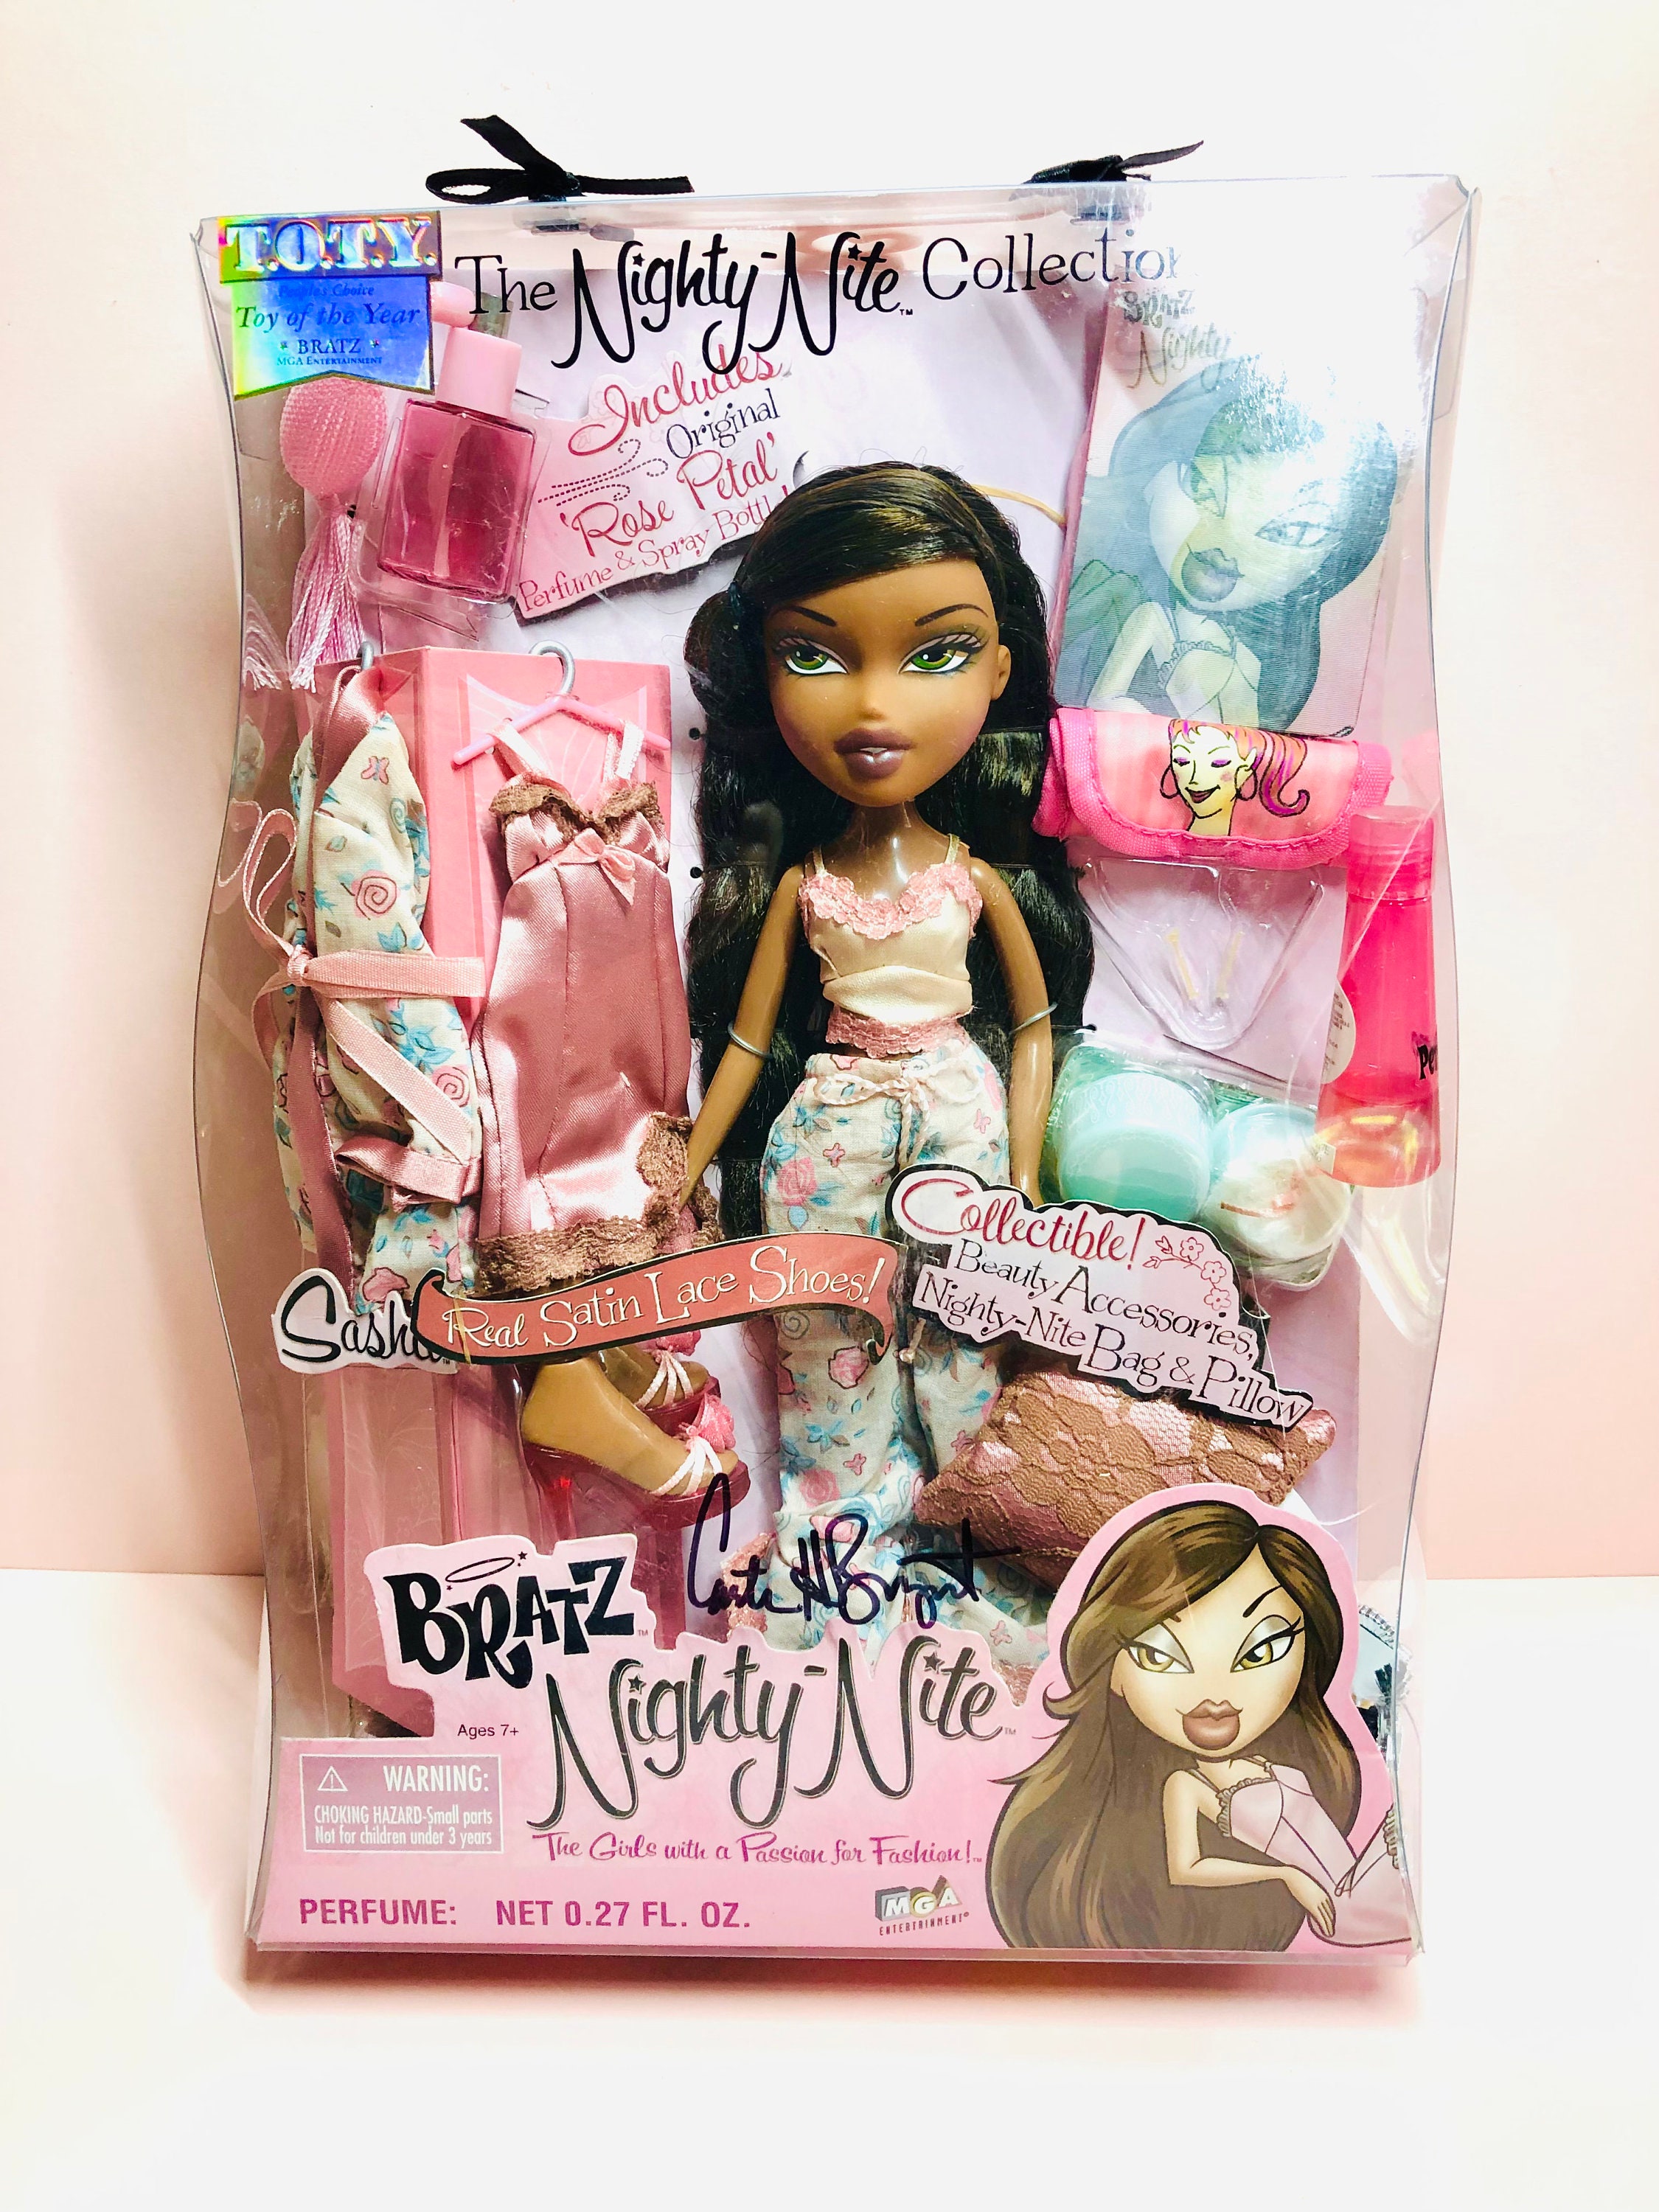 Bratz Nighty-Nite Sasha! Original 2004 edition. Autographed by Bratz  creator Carter Bryant, from his own collection.